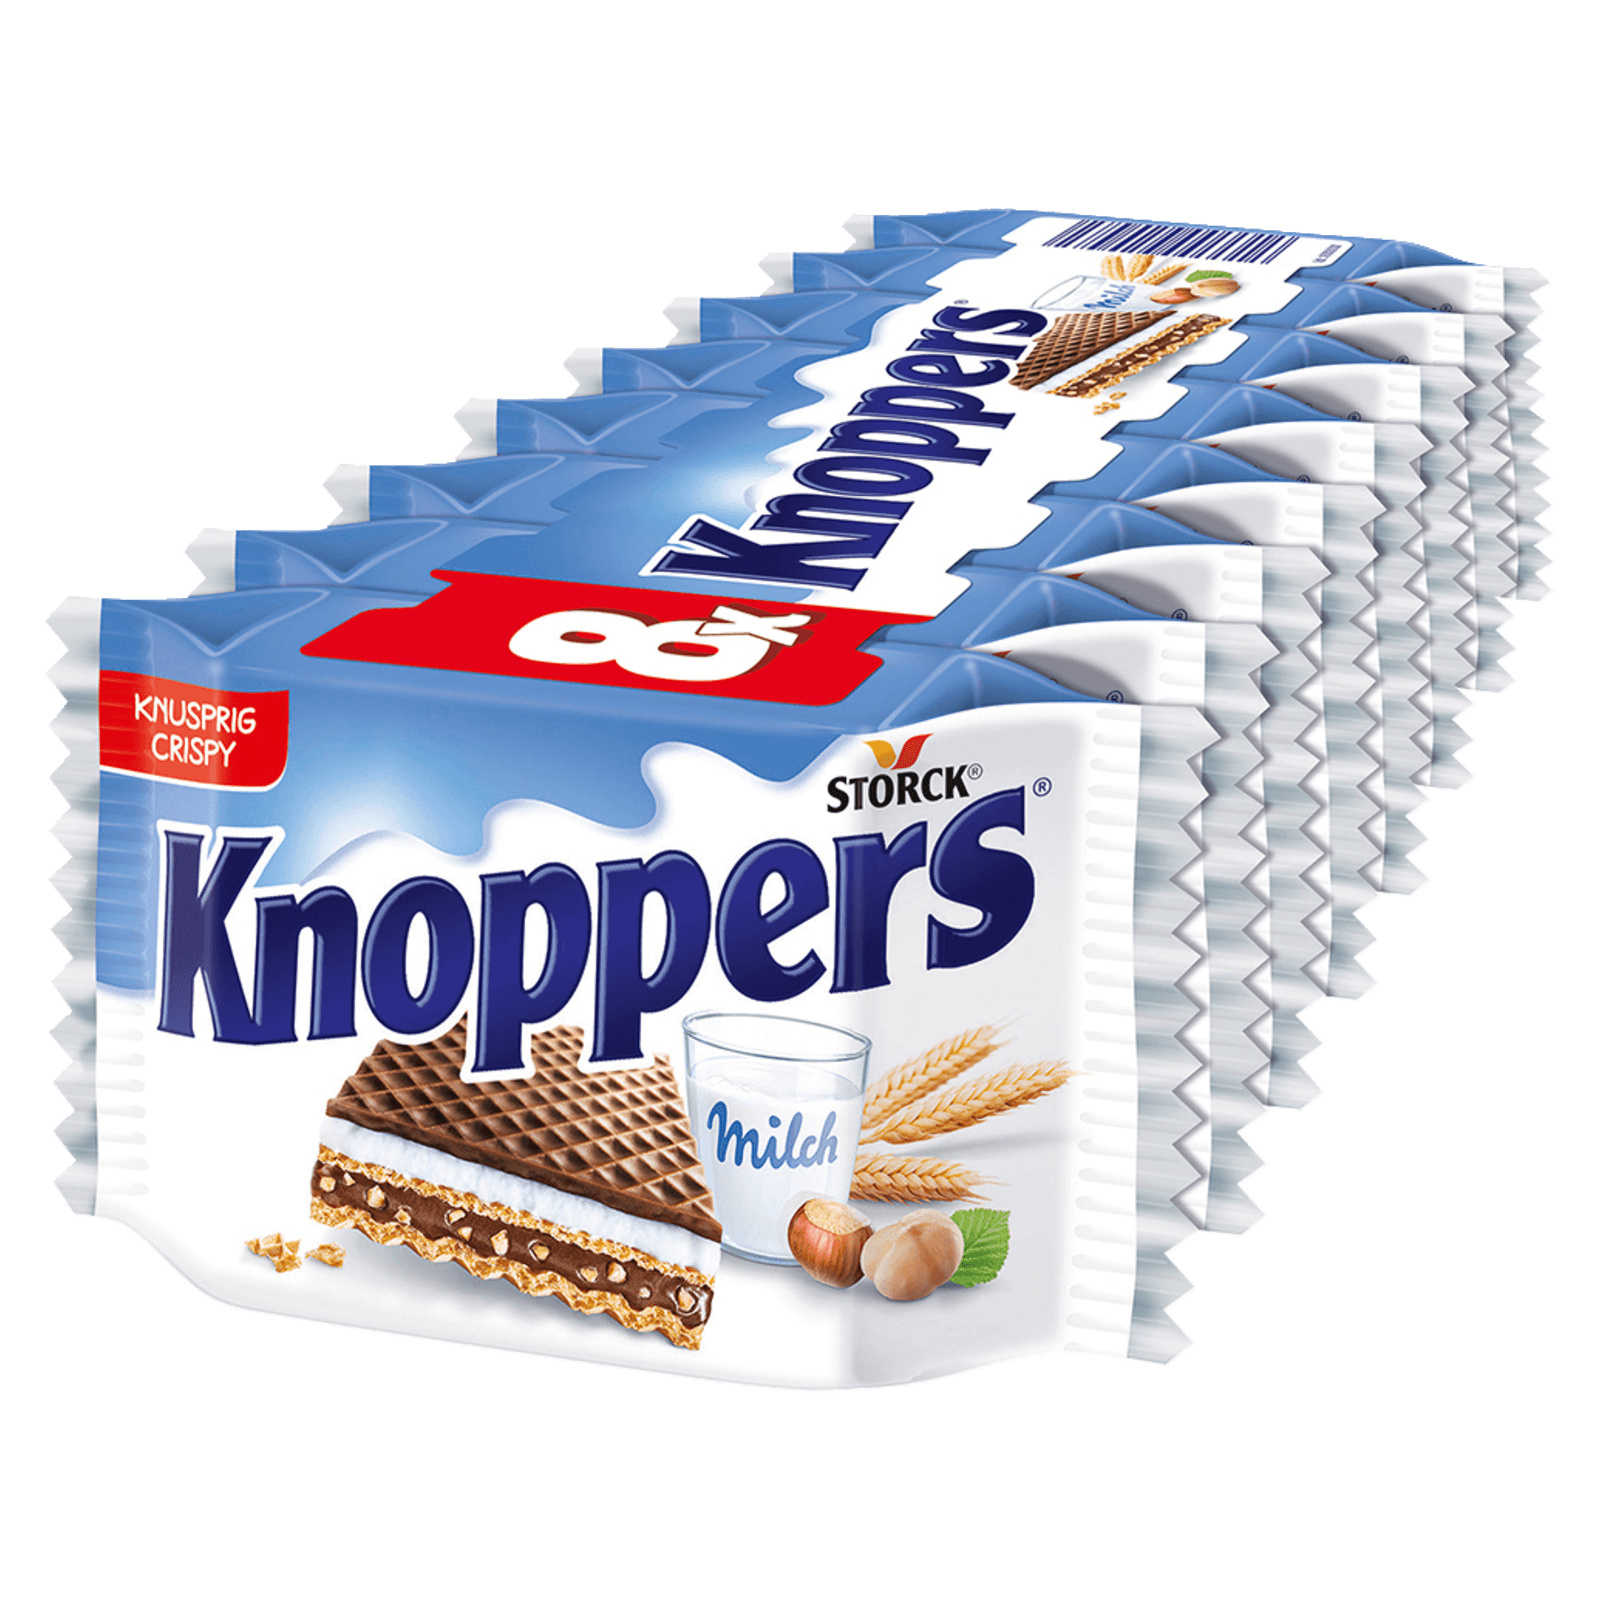 Knoppers